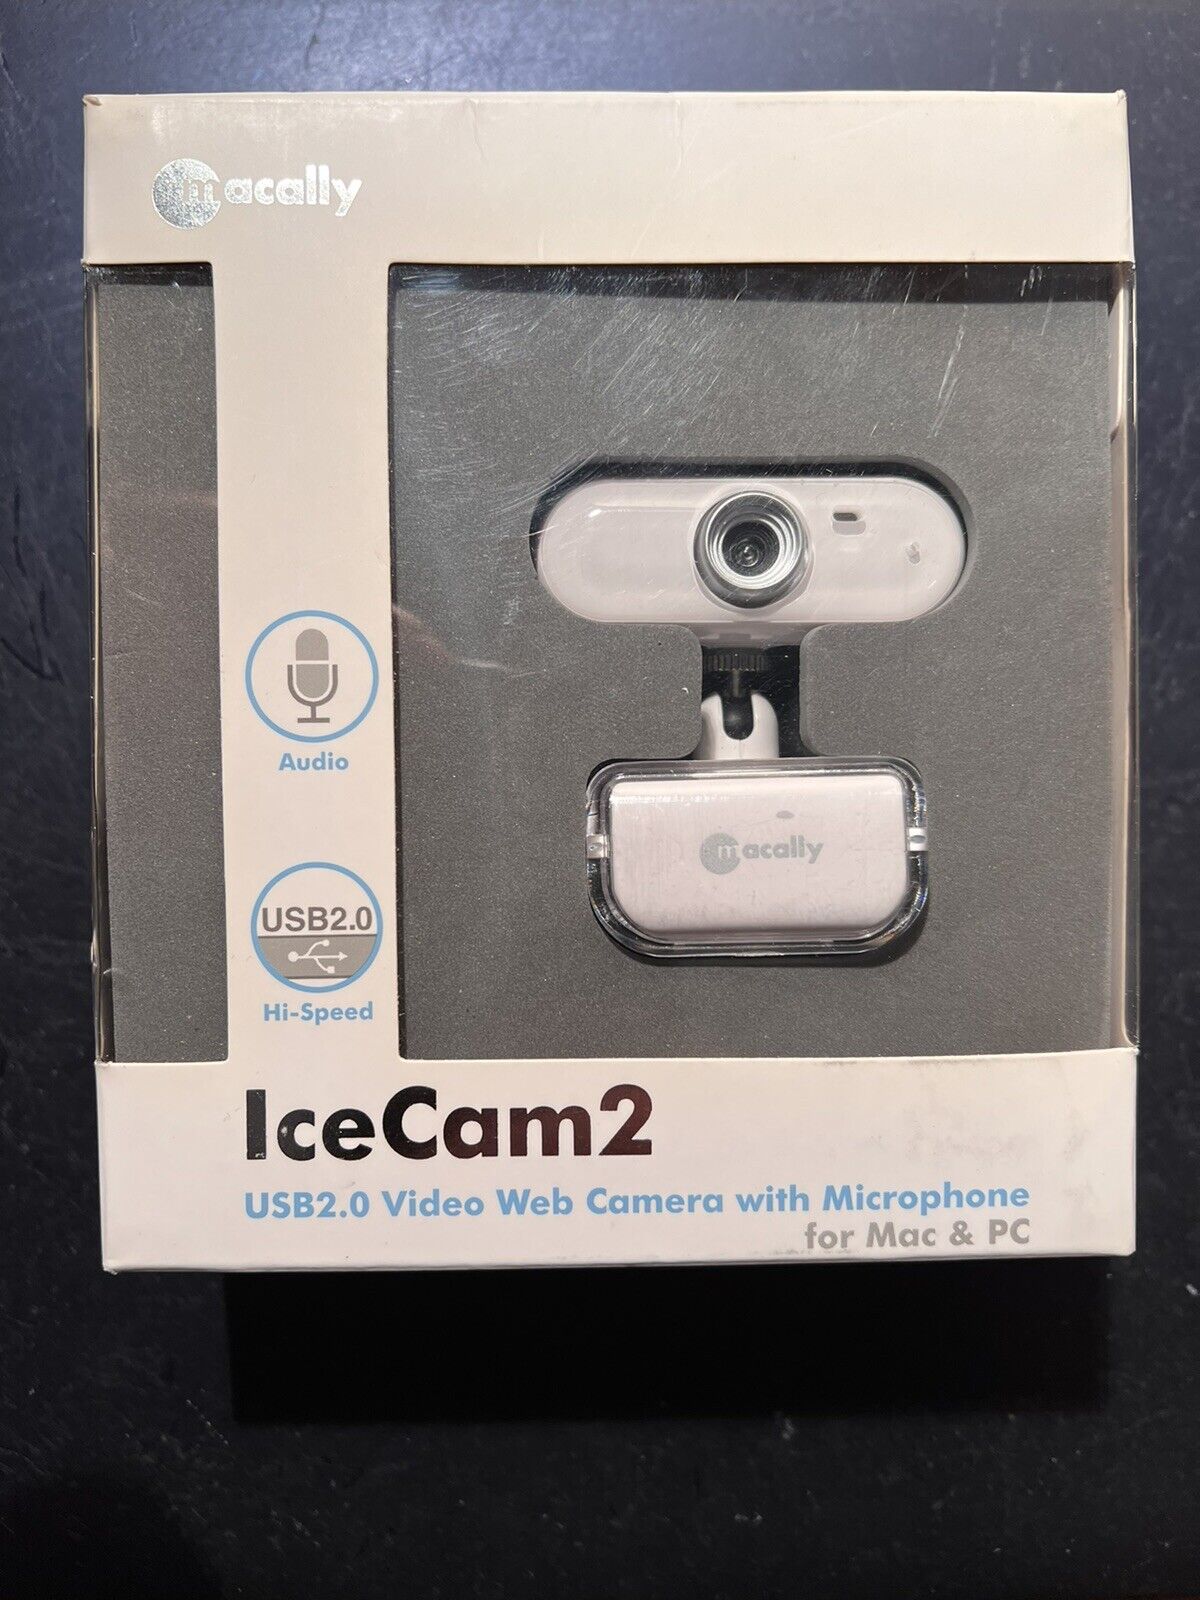 Macally IceCam2 USB 2.0  Video Web Camera with Microphone for Mac & PC